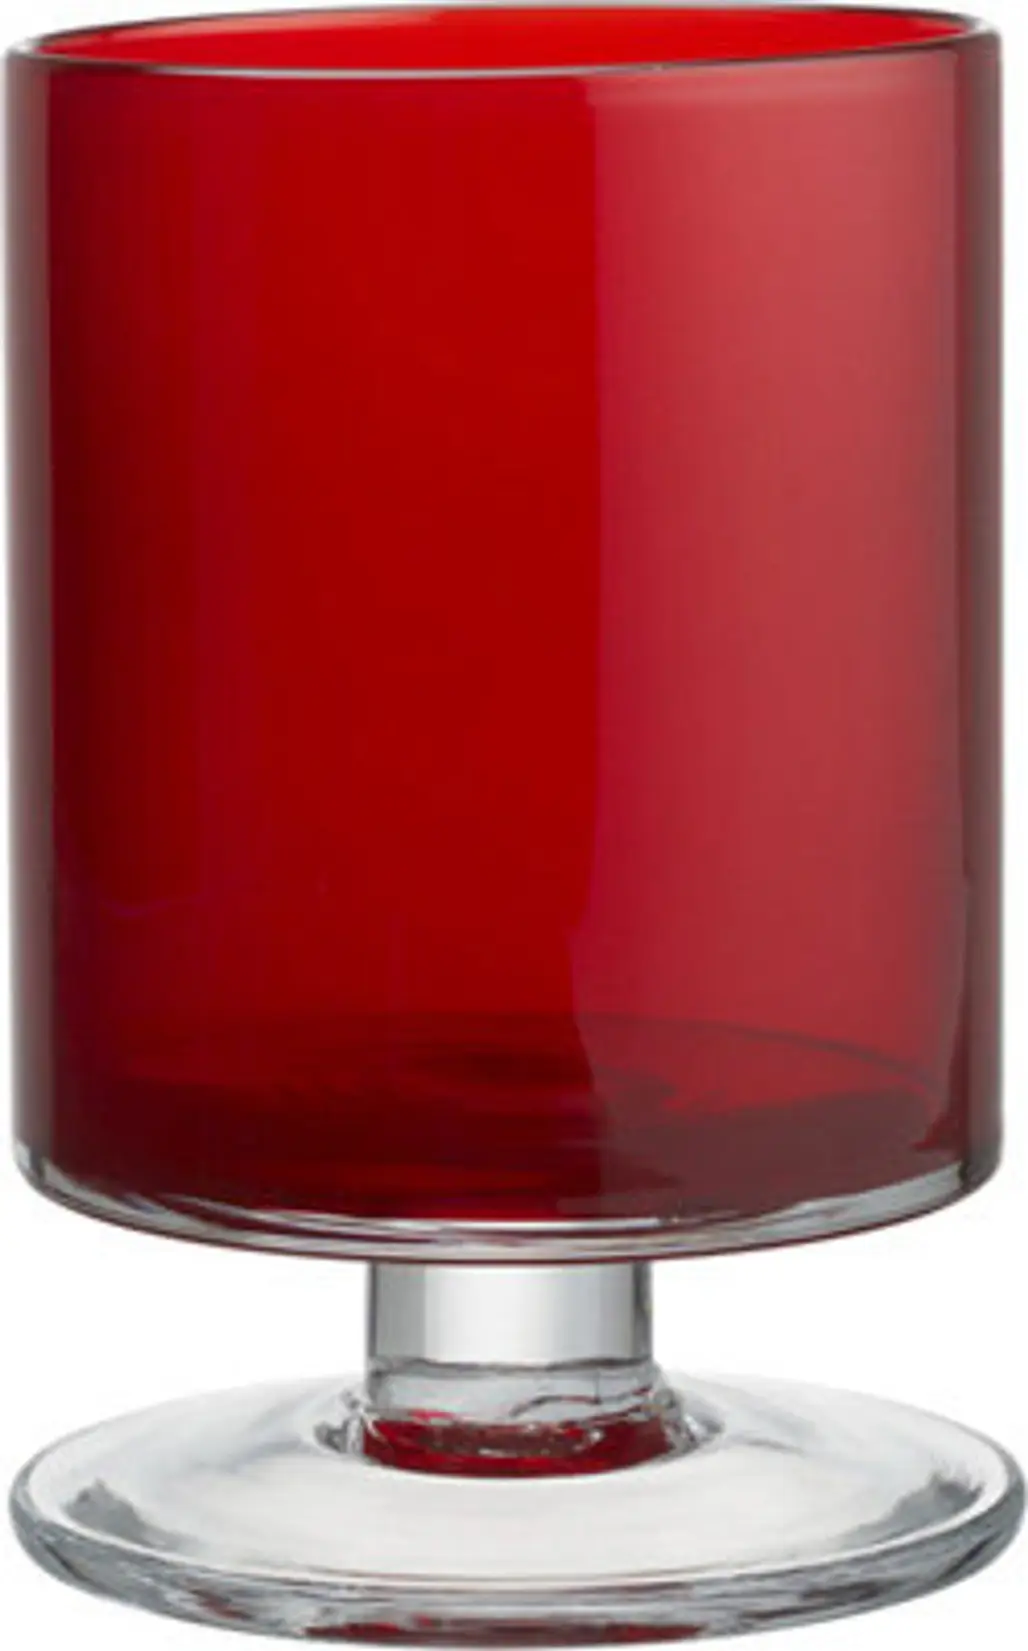 Crate & Barrel London Small Red Hurricane